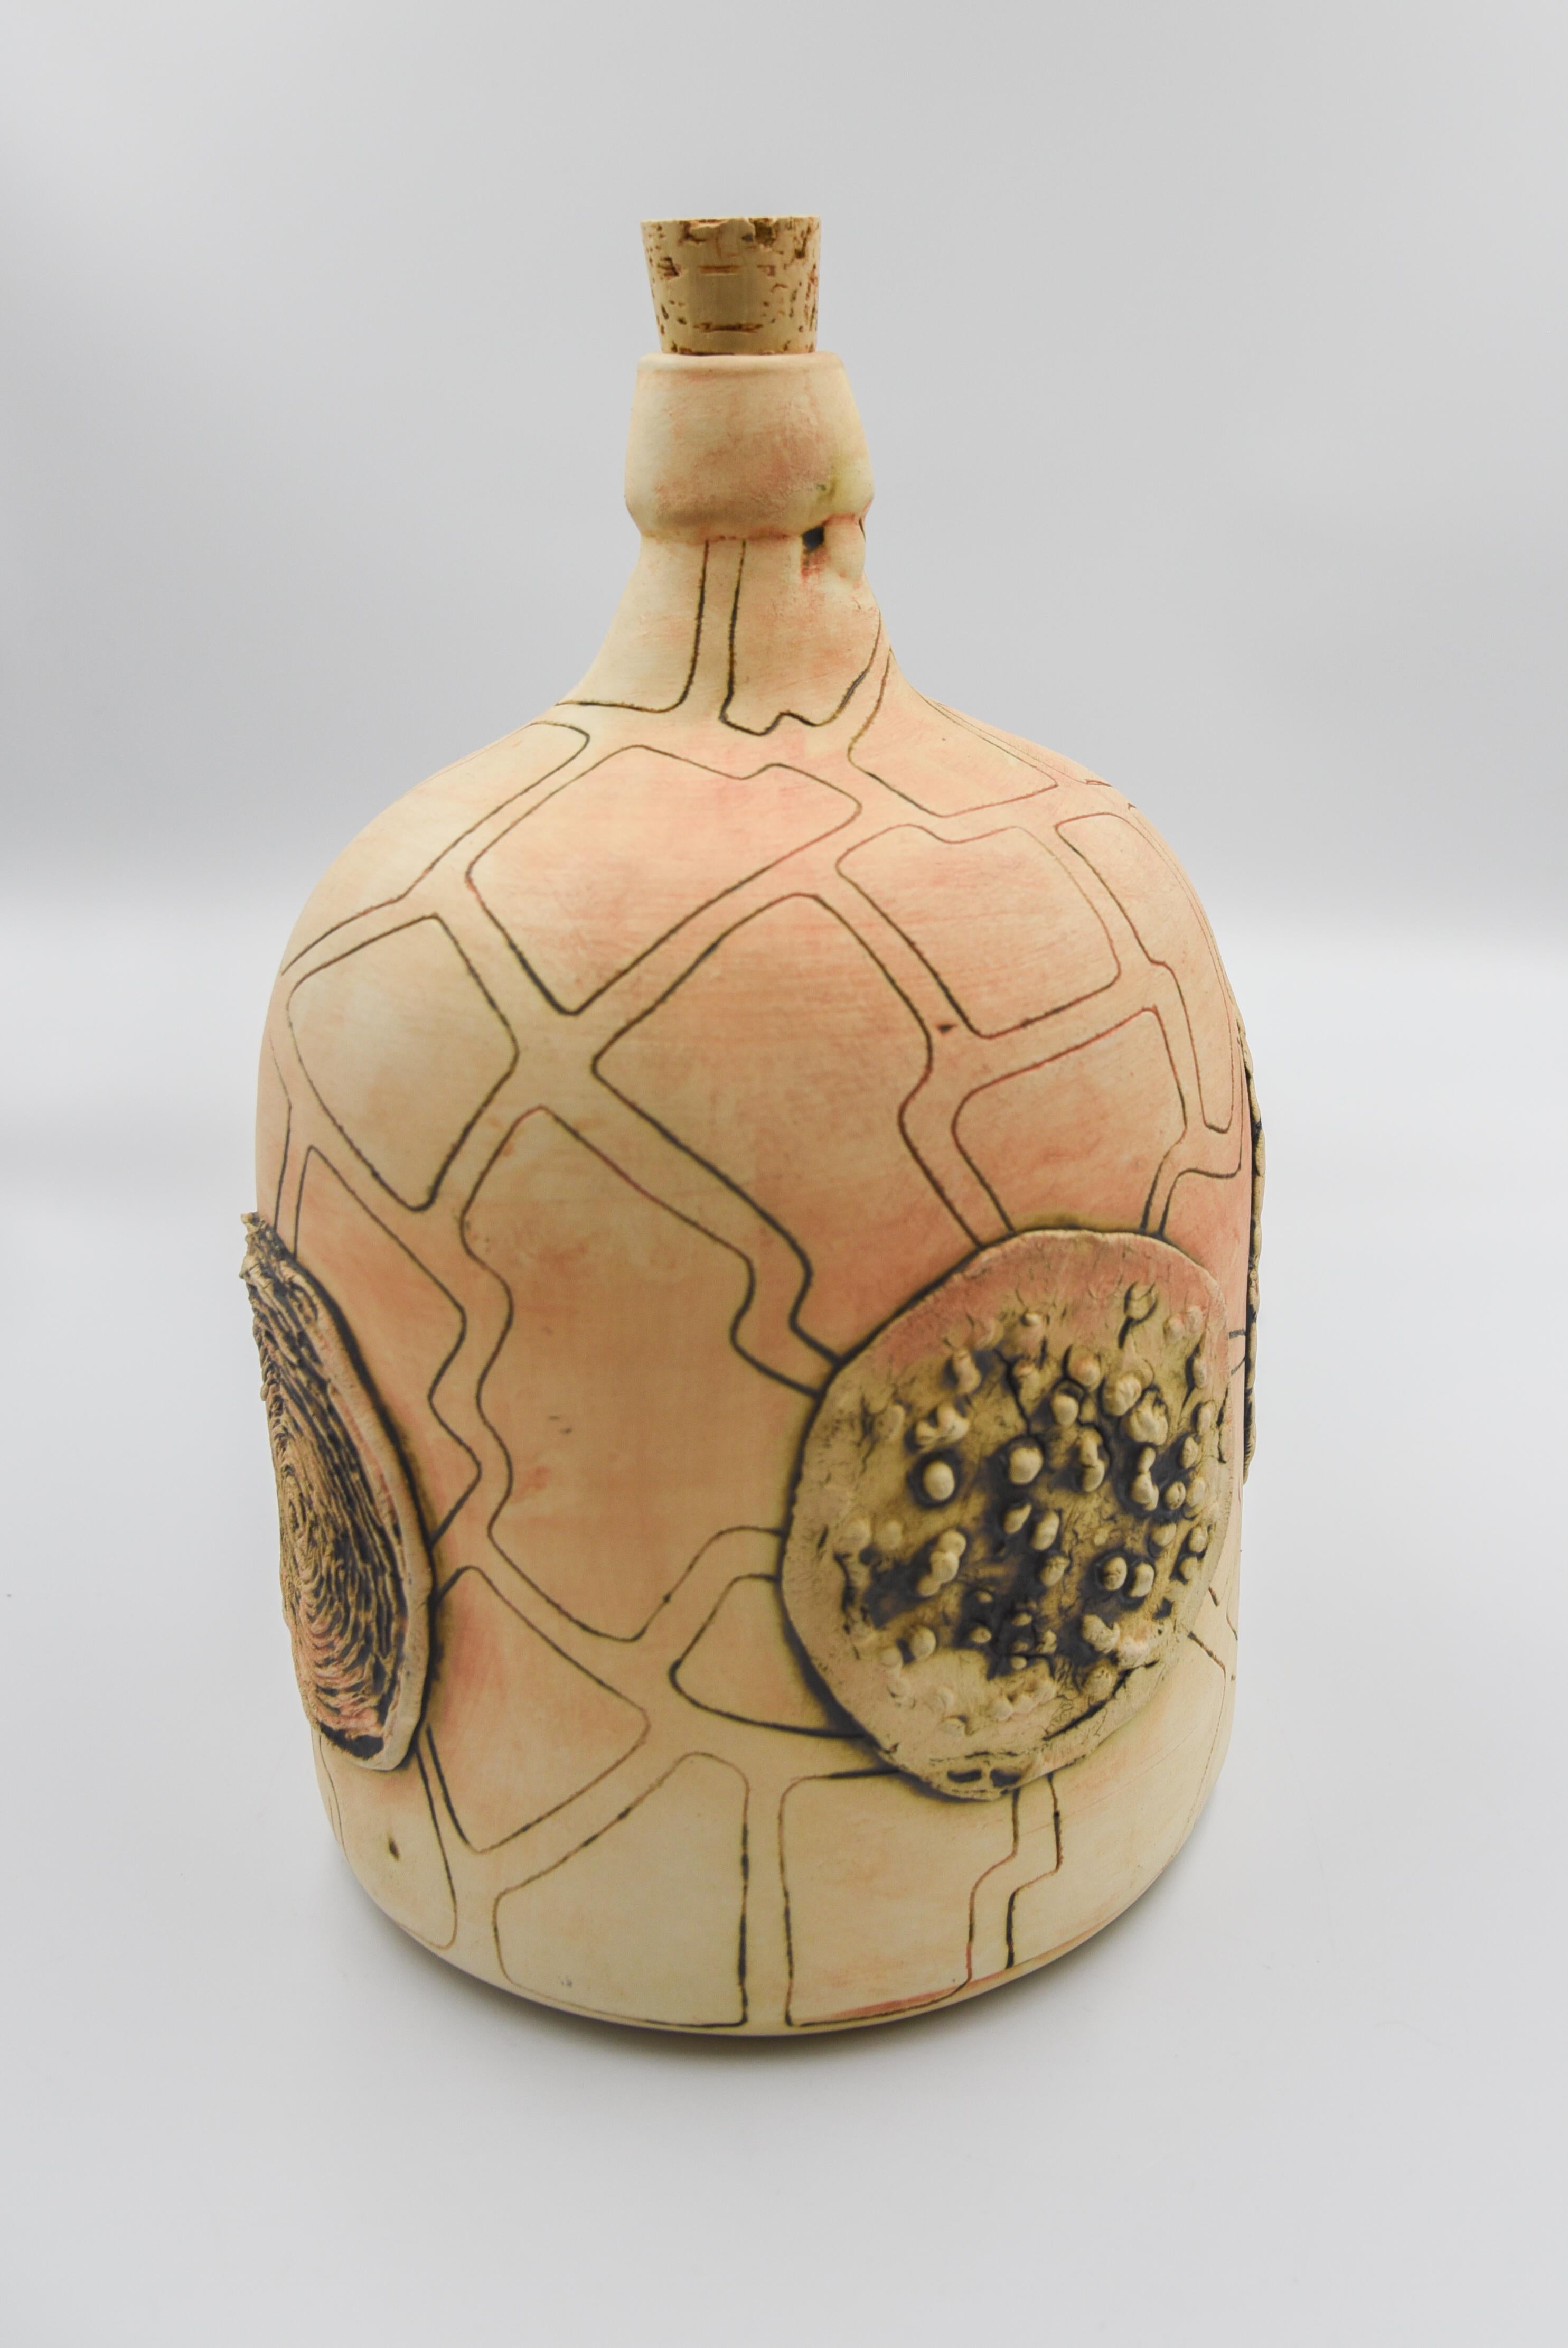 This rustic mezcal bottle is a replica of an antique bottle or demijohn which was used to store mezcal, drunken during folk theaters in Oaxaca, Mexico. The bottle is done with ceramic graffiti sgraffito technique which is later painted with oxide